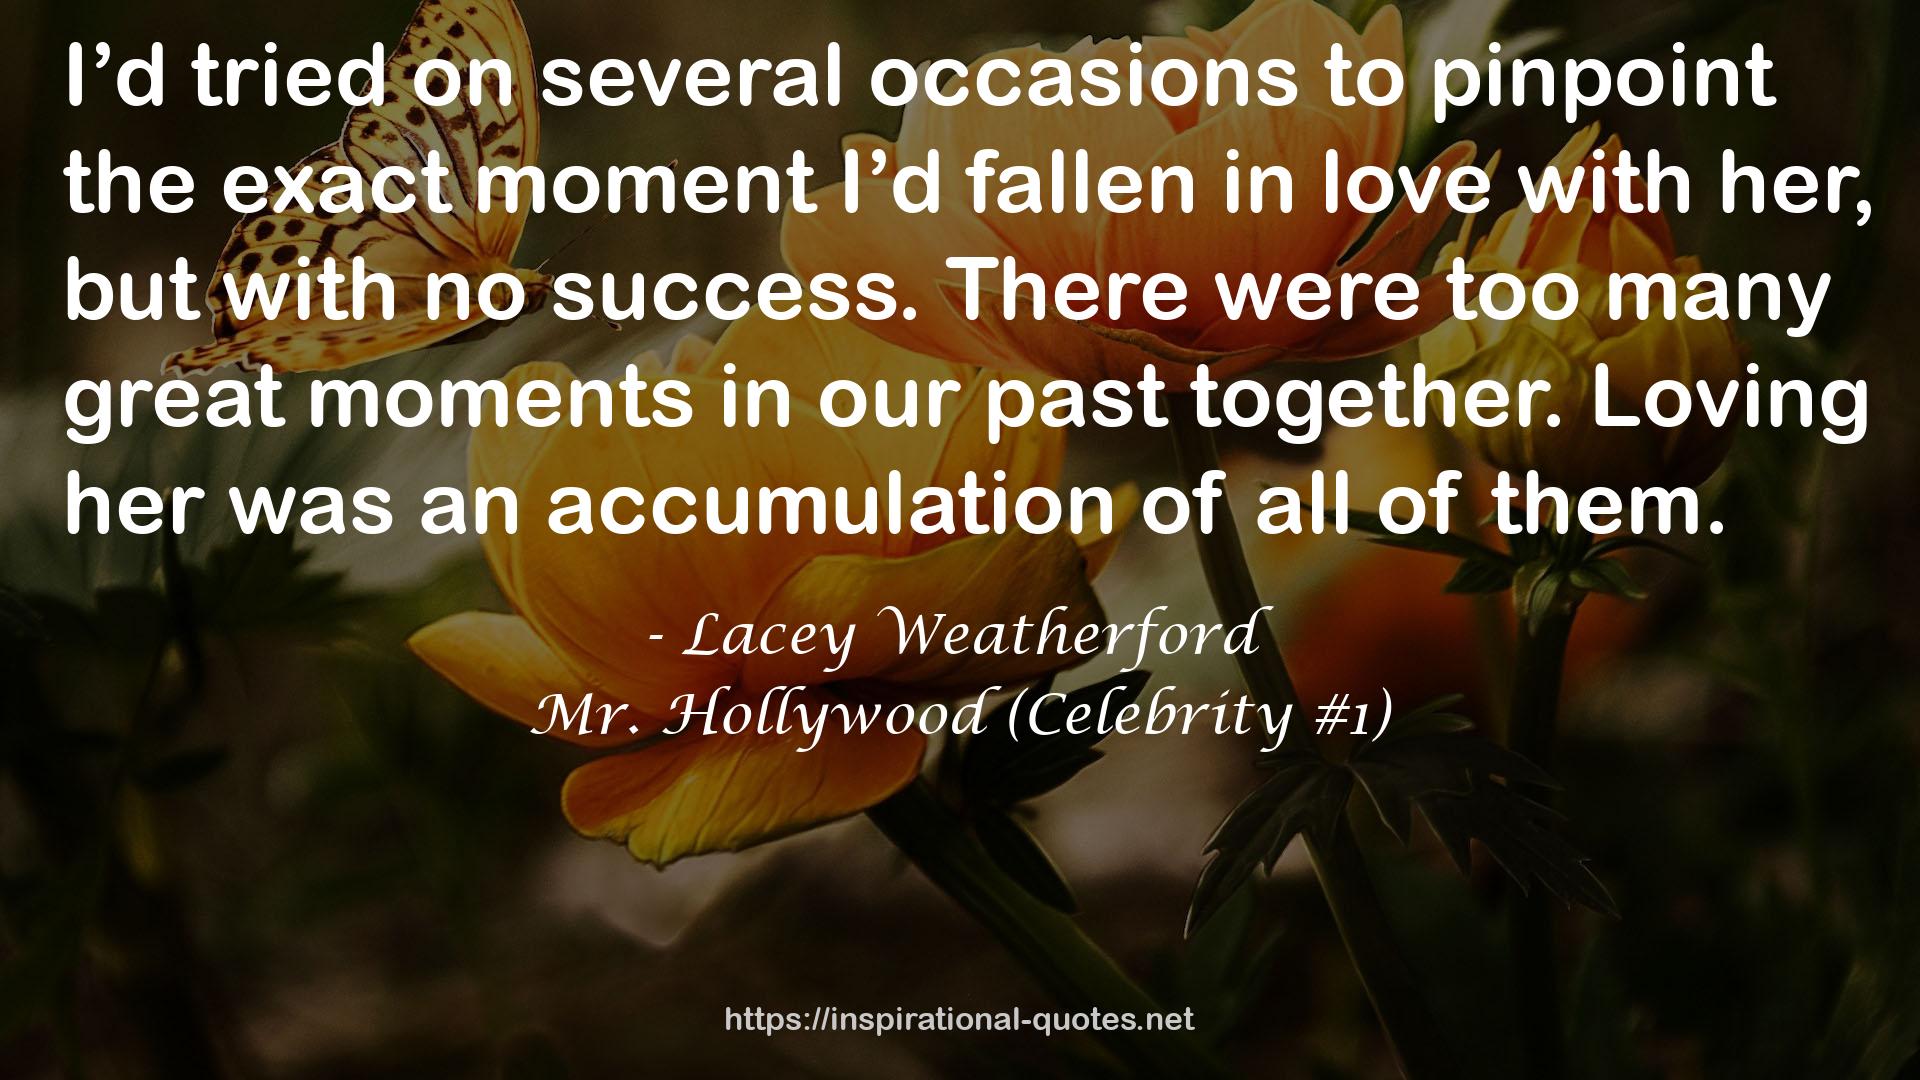 Mr. Hollywood (Celebrity #1) QUOTES